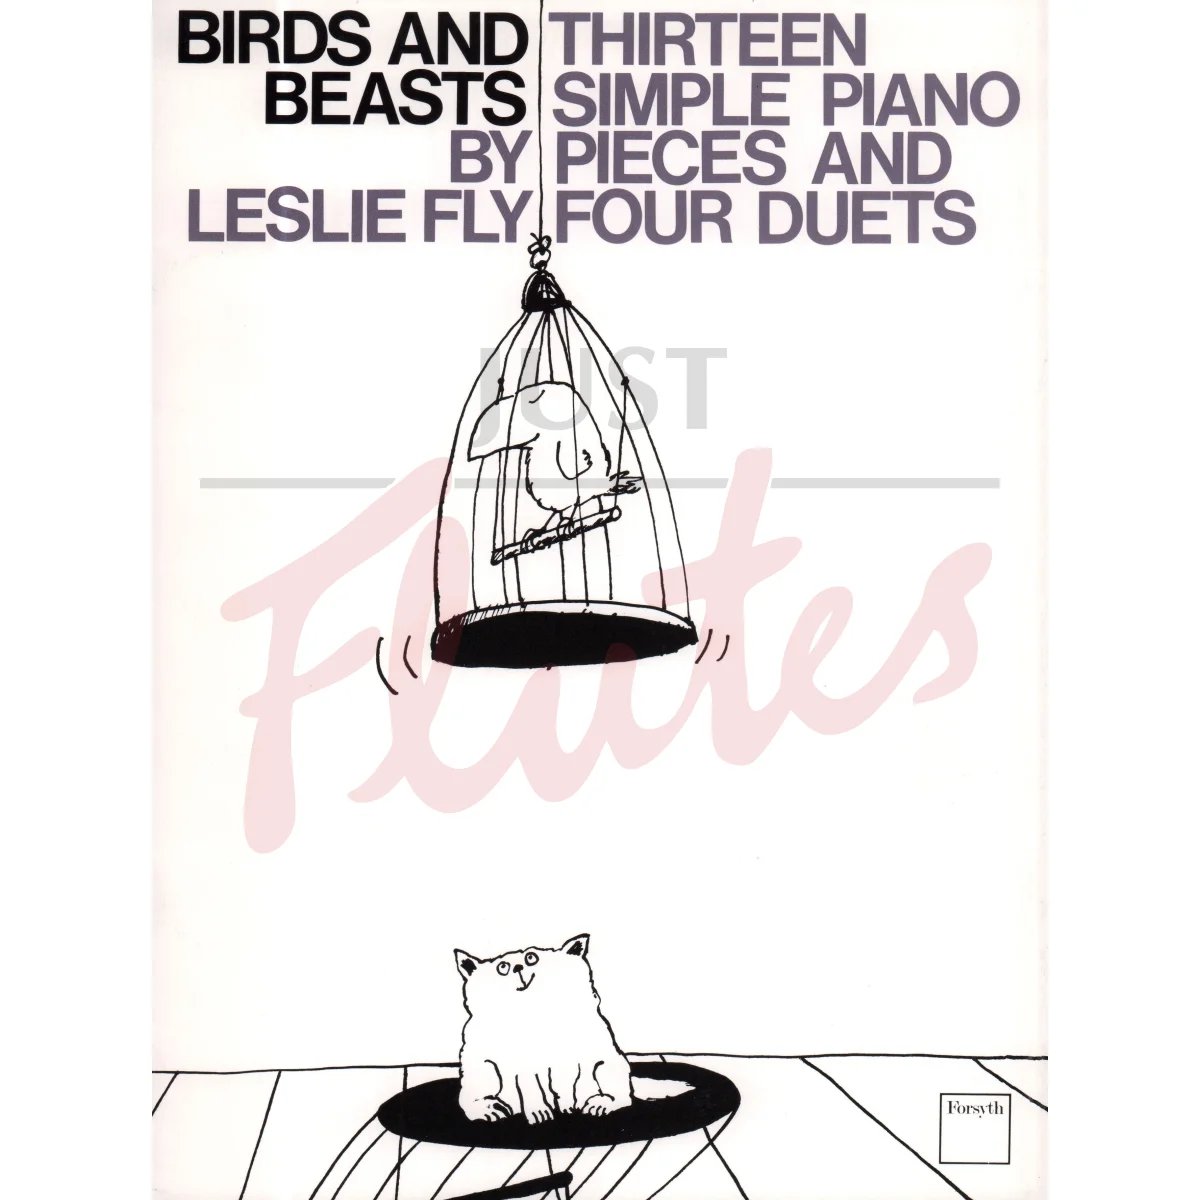 Birds and Beasts for Piano